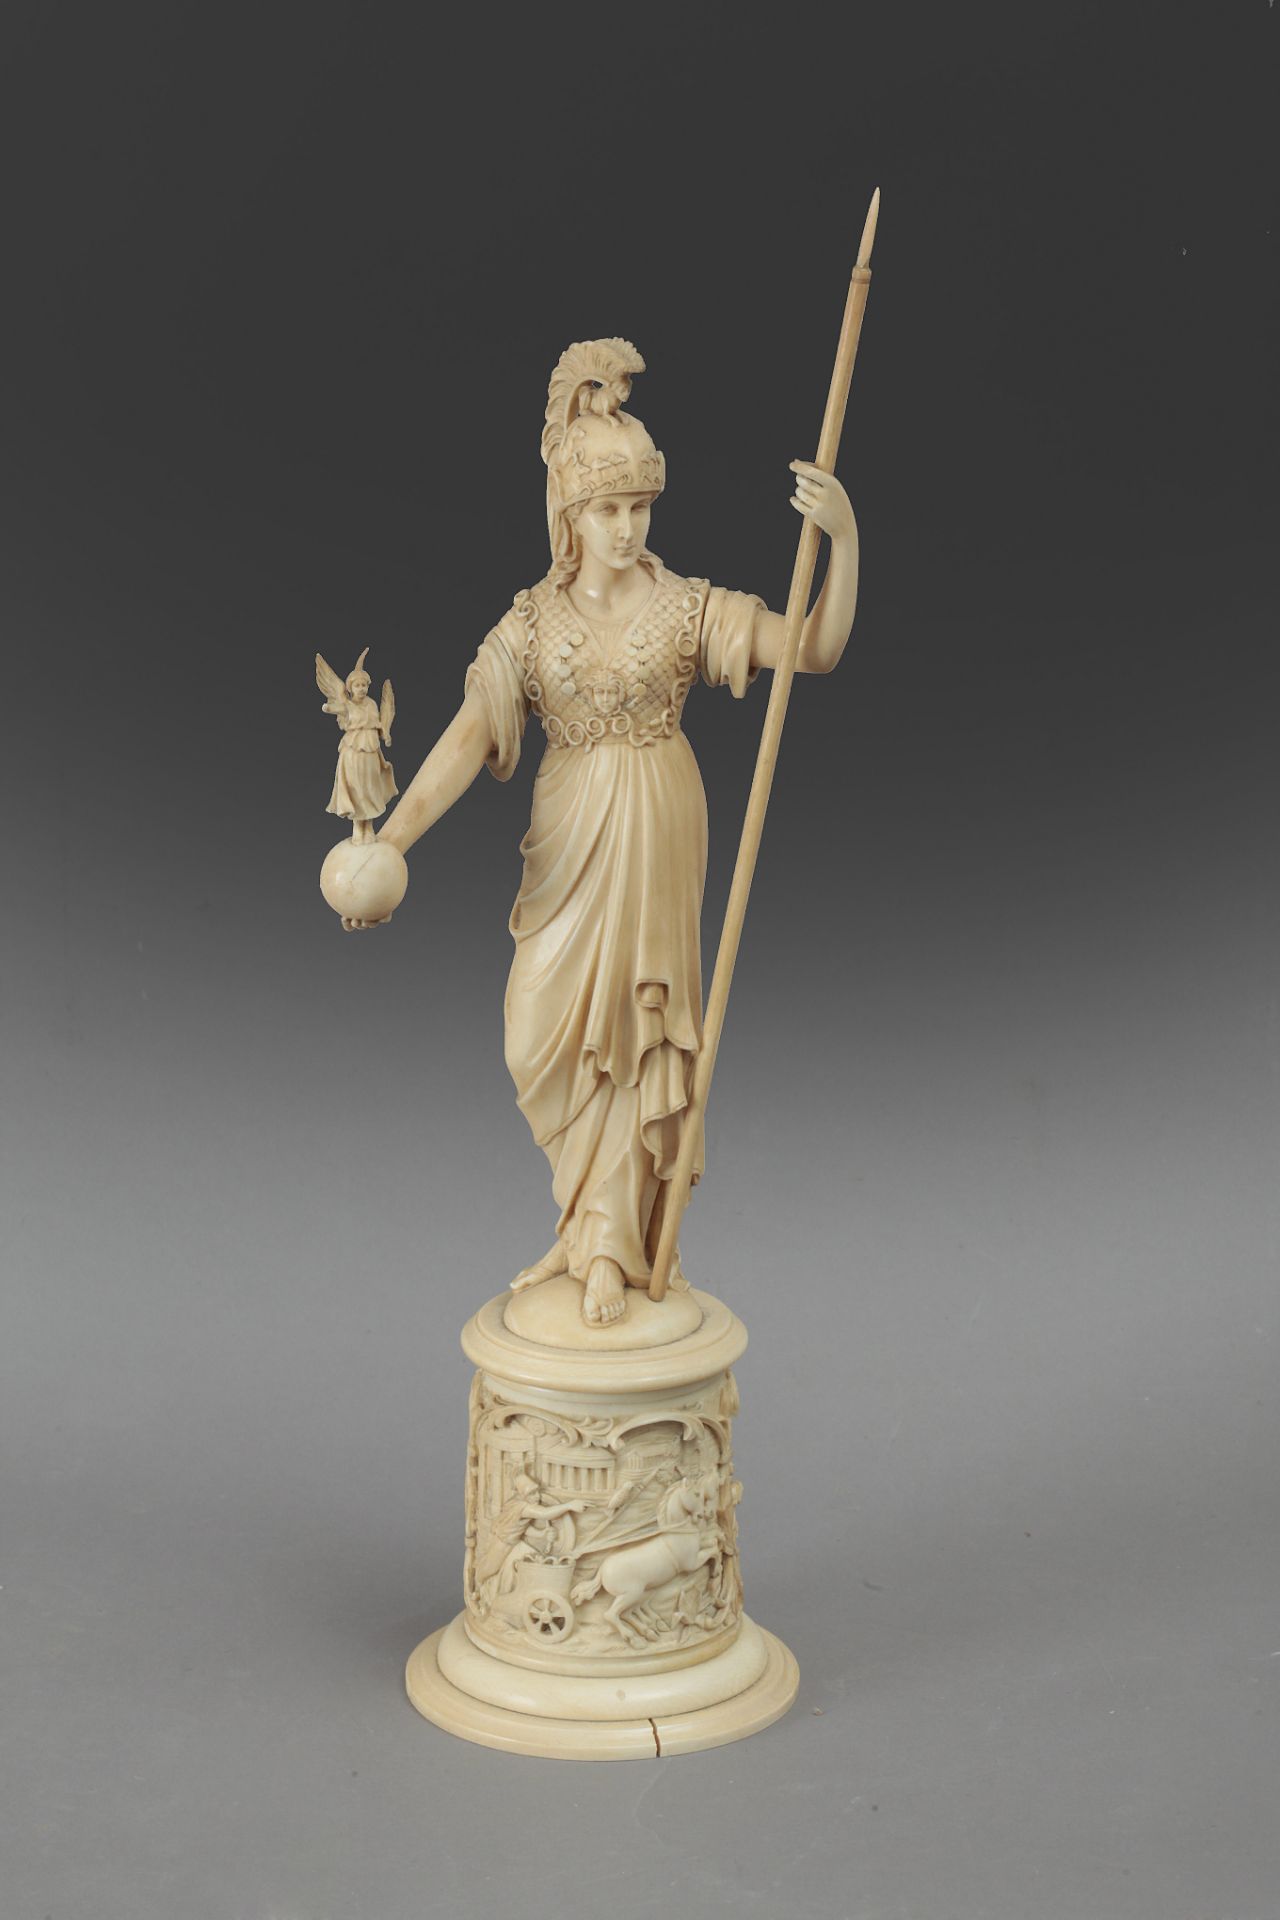 19th century French School. Carved ivory sculpture of Athenea